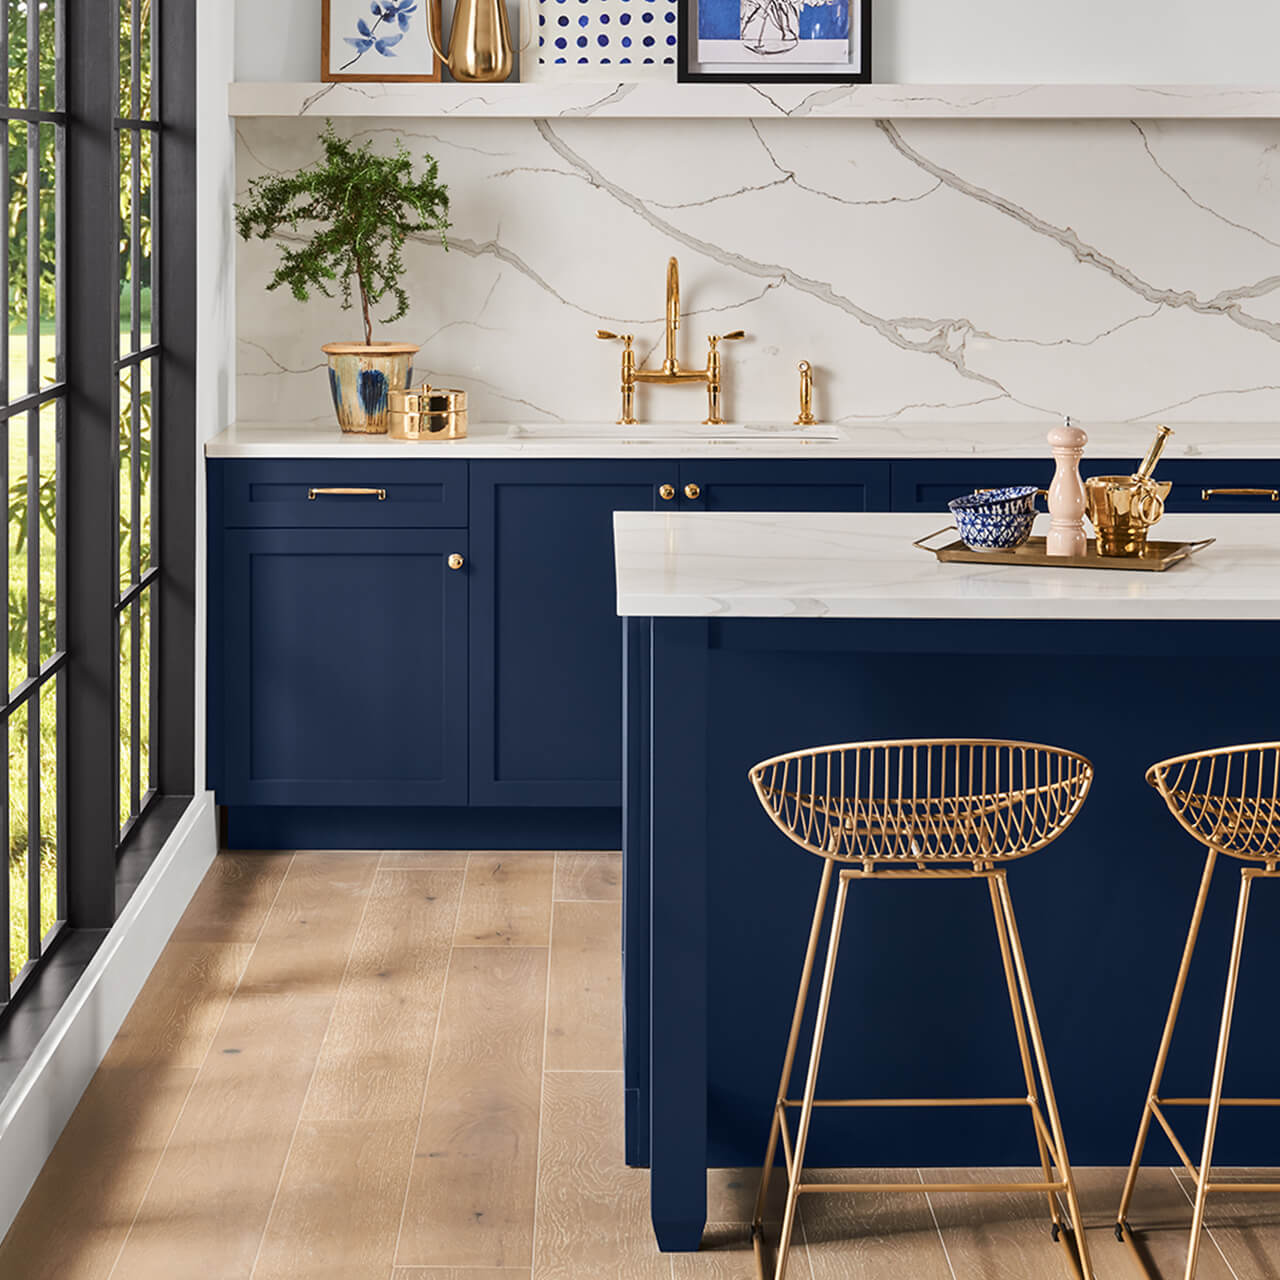 A contemporary kitchen with white countertops, marble backsplash and navy blue cabinets. S-W featured color: SW 6244 Naval.